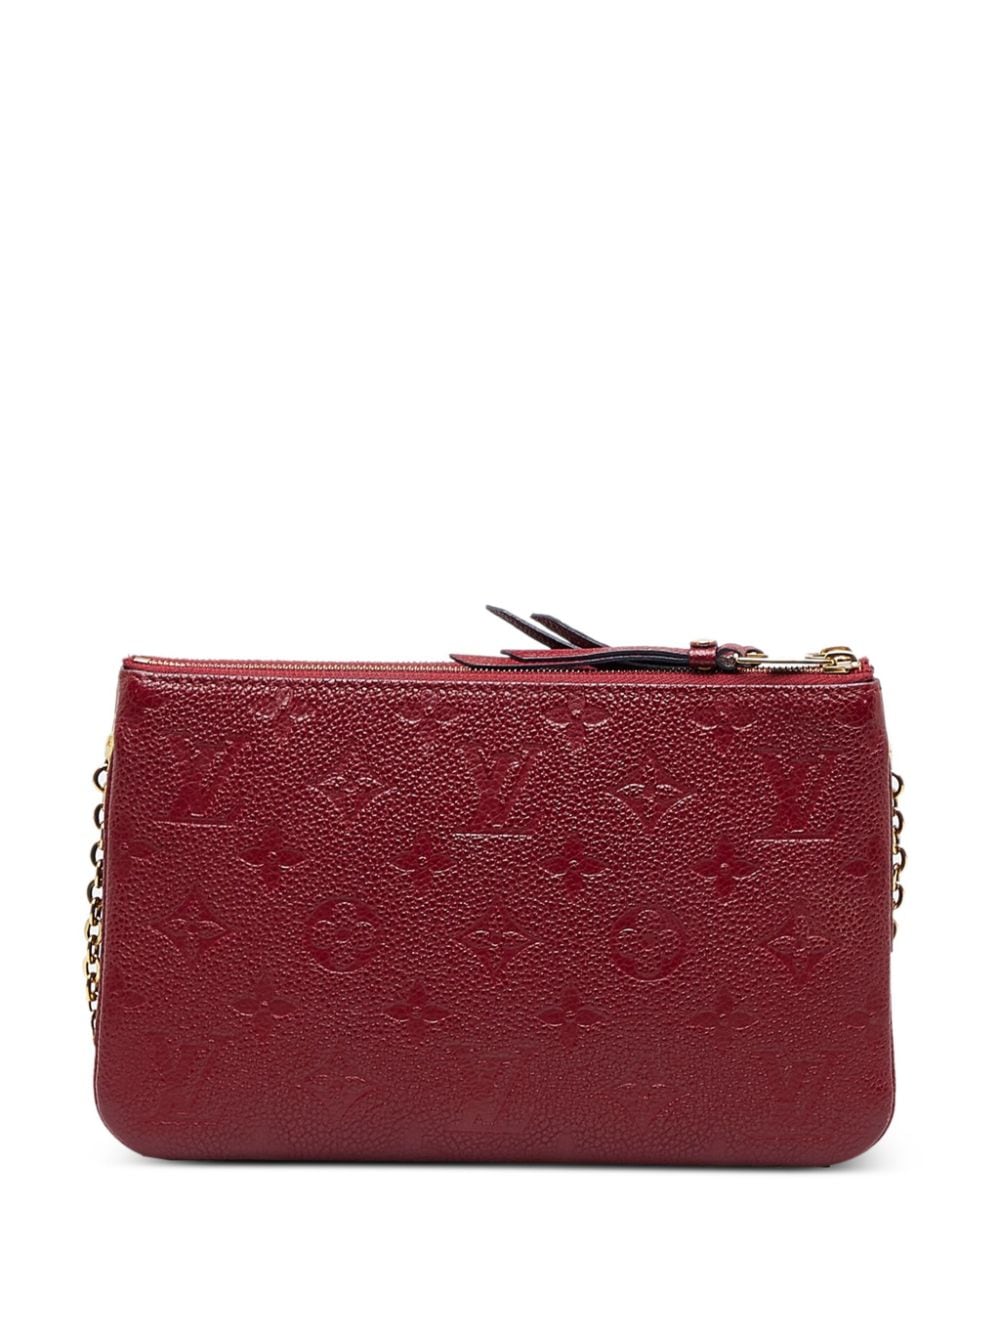 Louis Vuitton 2019 pre-owned clutch met dubbele rits - Rood